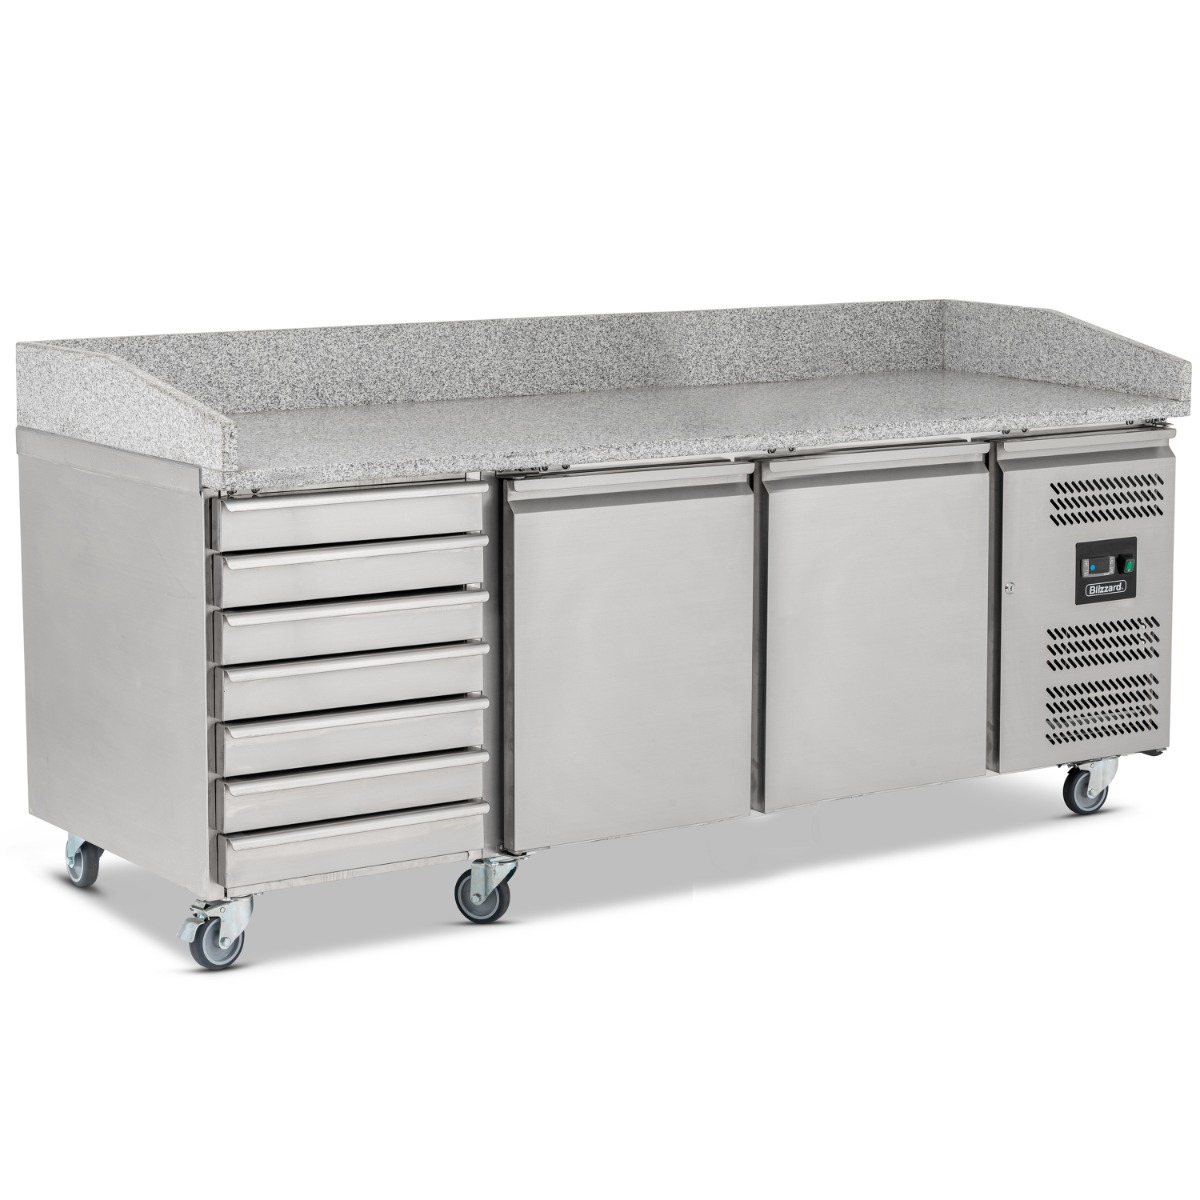 BLIZZARD 2 Dr Pizza Prep Counter with Neutral drawers 580L - BPB2000-7N